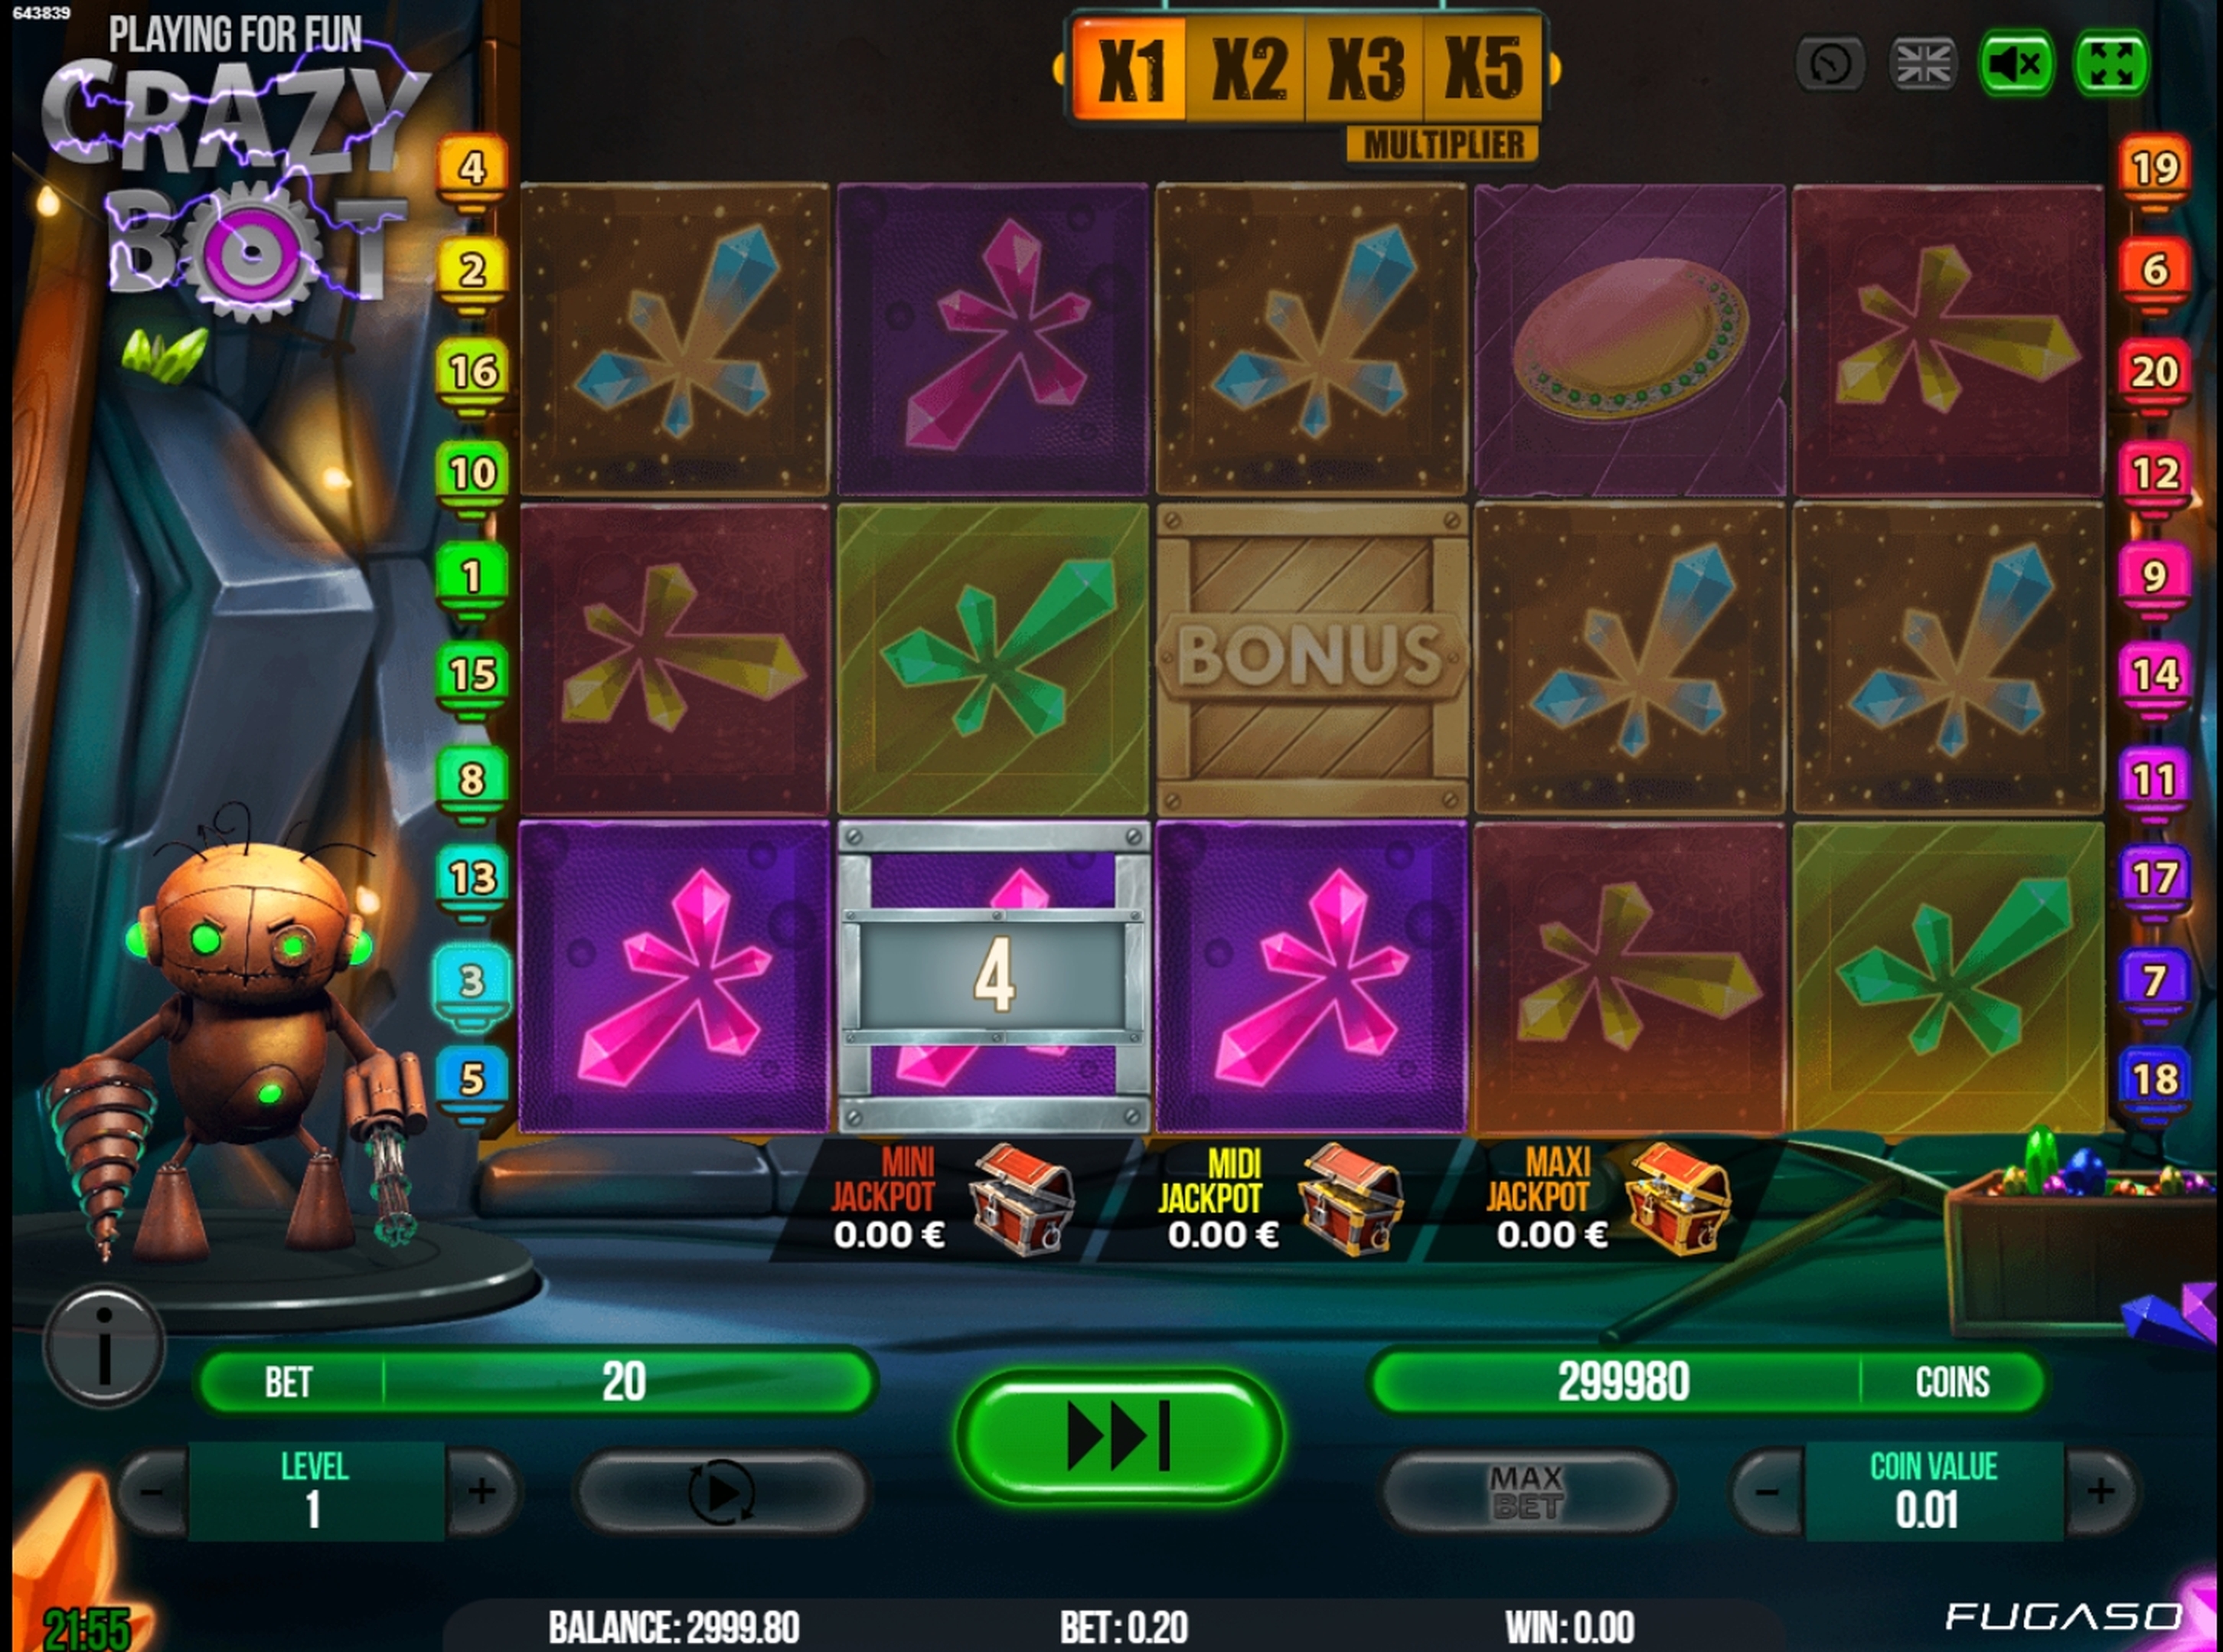 Win Money in Crazy Bot Free Slot Game by Fugaso